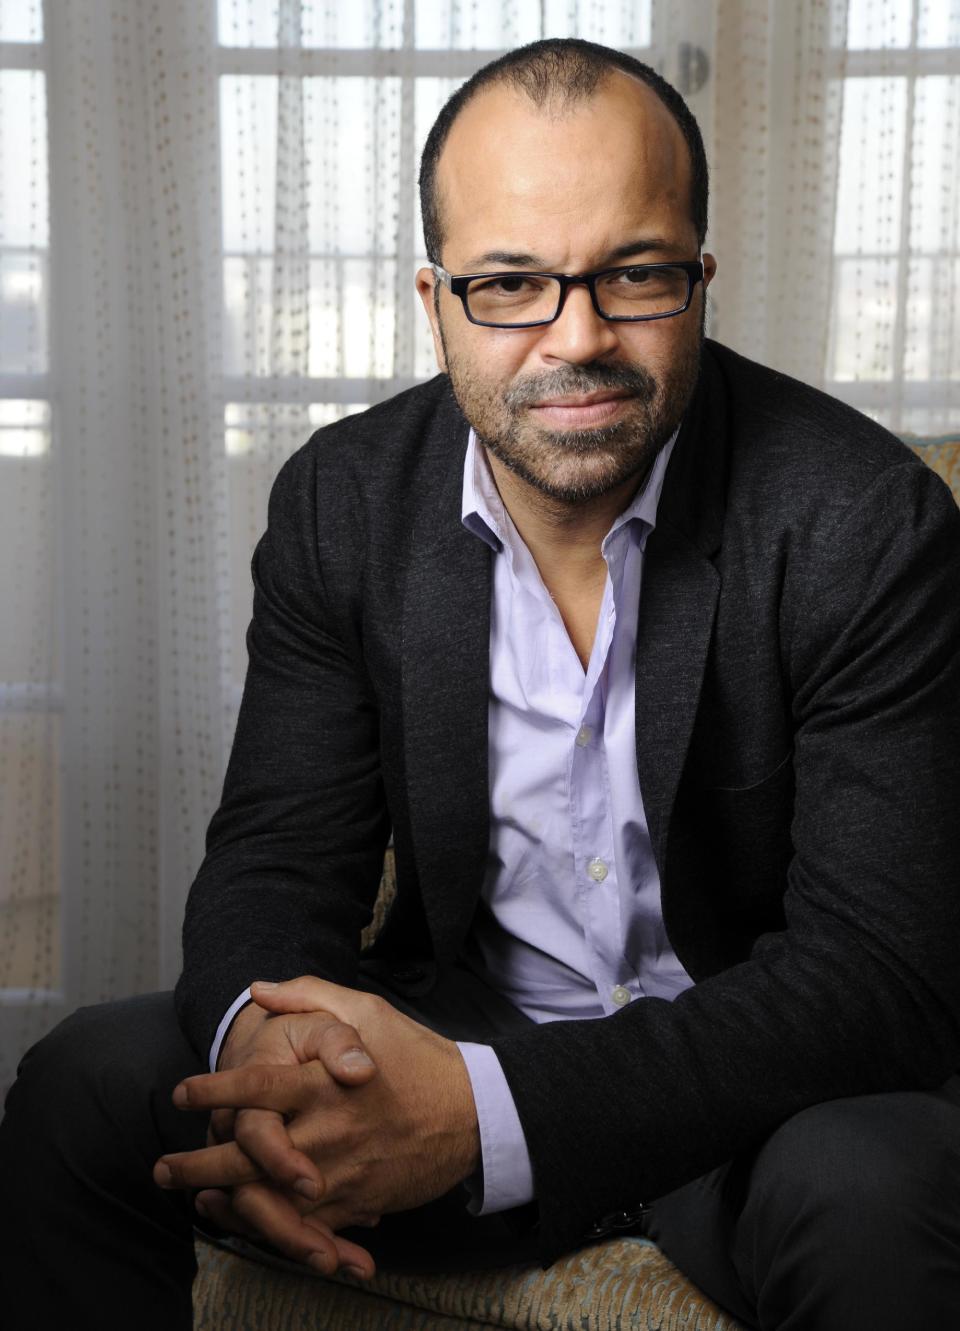 In this Friday, Nov. 8, 2013 photo, Jeffrey Wright, a cast member in "The Hunger Games: Catching Fire," poses for a portrait at the Four Seasons Hotel in Beverly Hills, Calif. Wright is one of the most versatile African-American actors of his generation. With Broadway chops, an Emmy, Golden Globe, Tony and over 35 films under his belt, including the No. 1 movie “The Hunger Games: Catching Fire,” the 47-year-old actor is far from a household name and he could care less. (Photo by Chris Pizzello/Invision/AP)